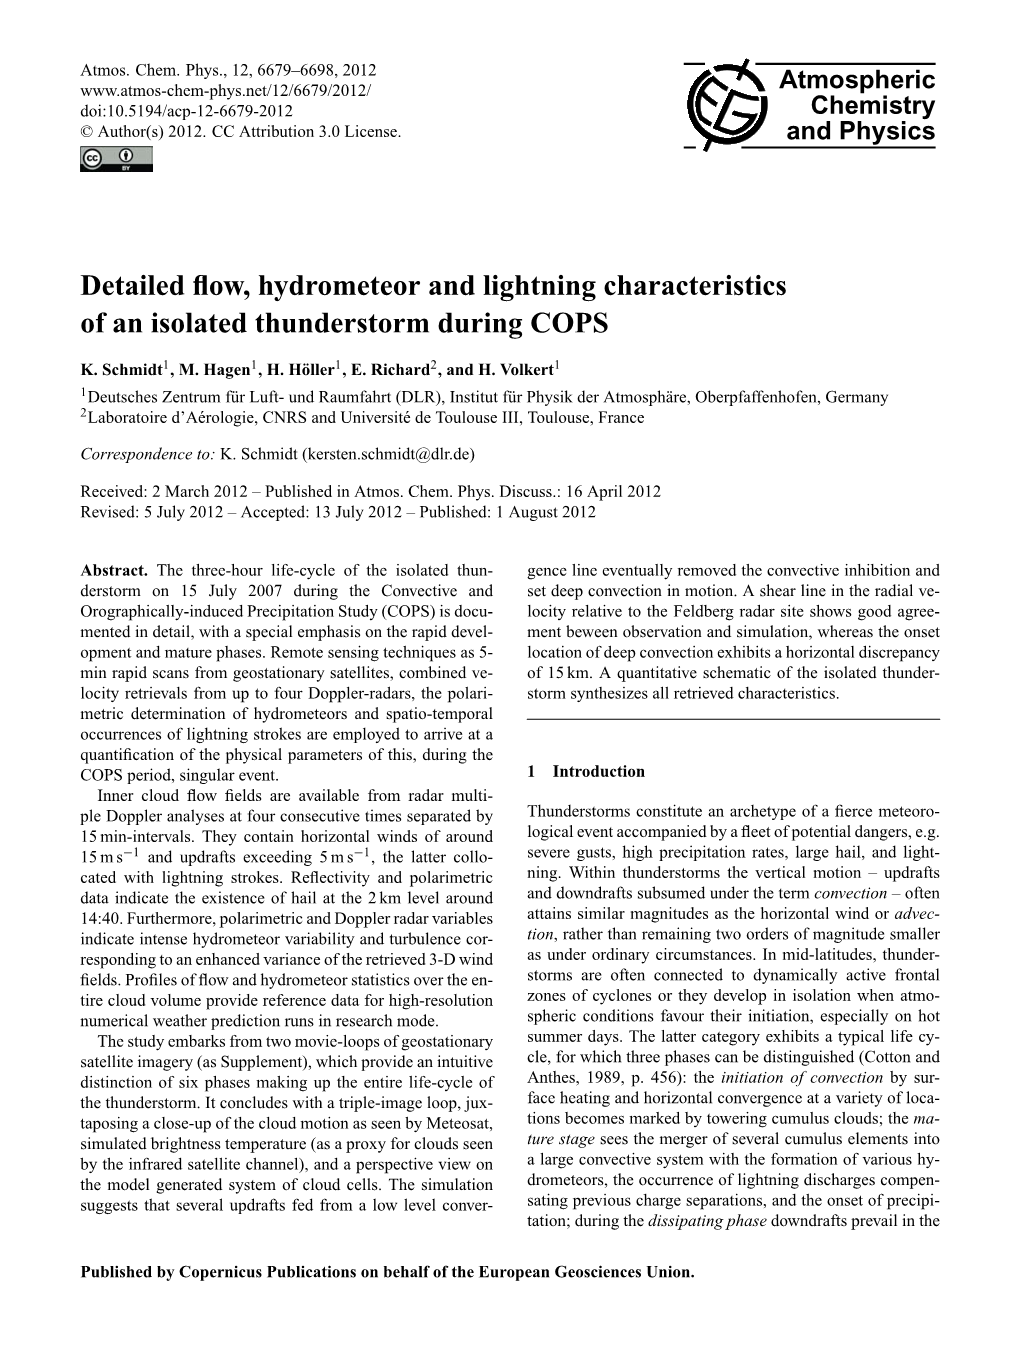 Detailed Flow, Hydrometeor and Lightning Characteristics of An